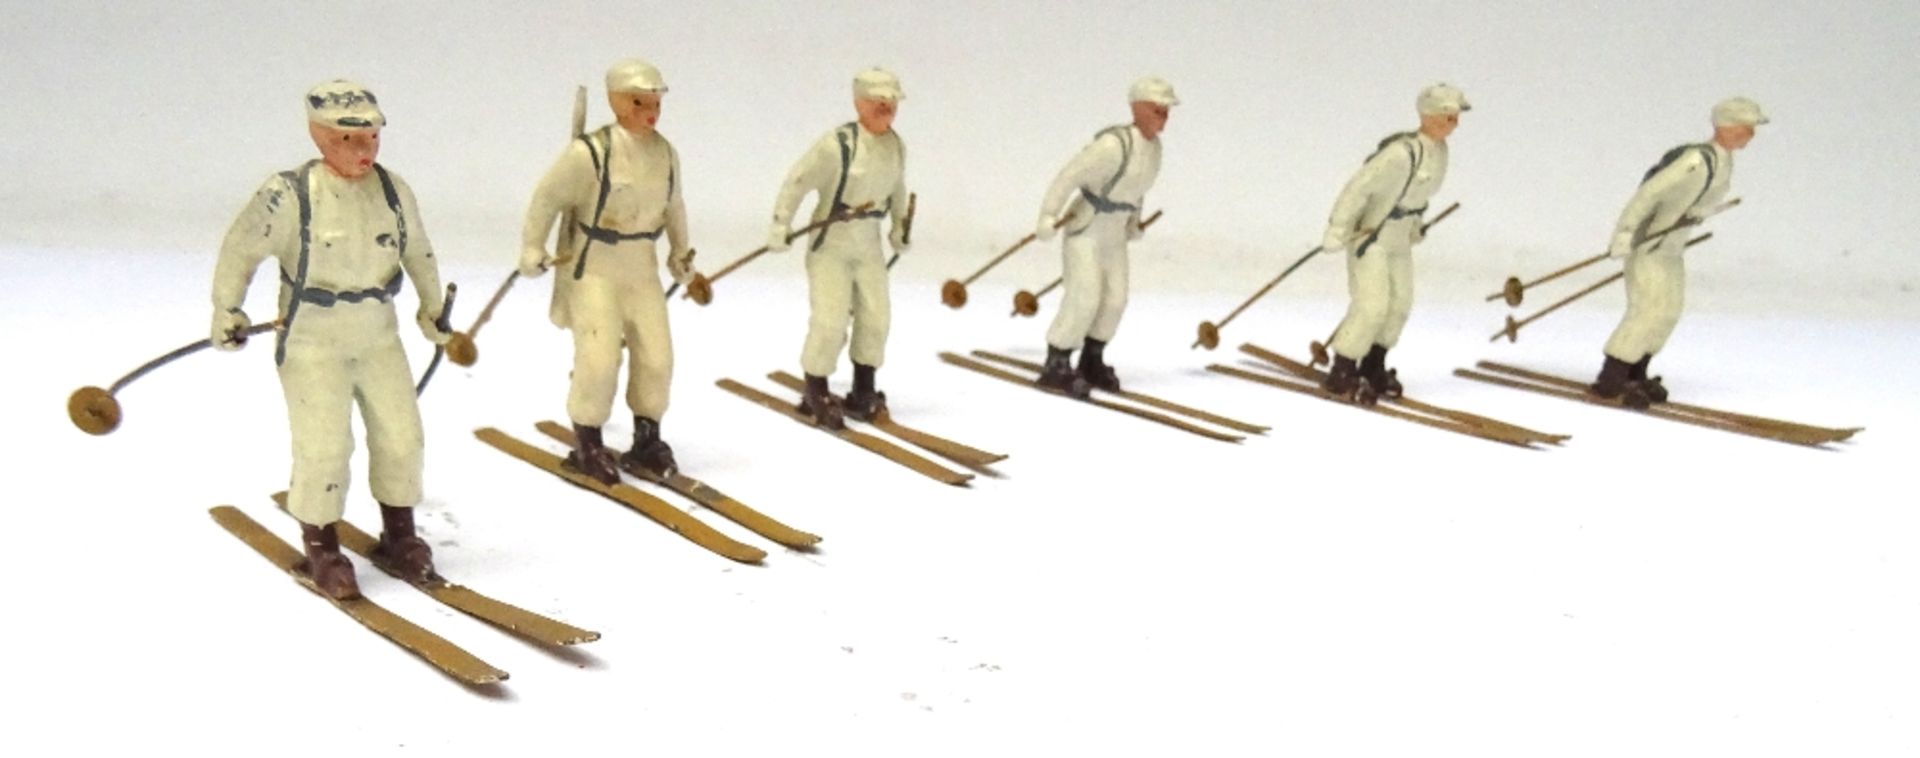 Britains from set 2017, six Ski Troops